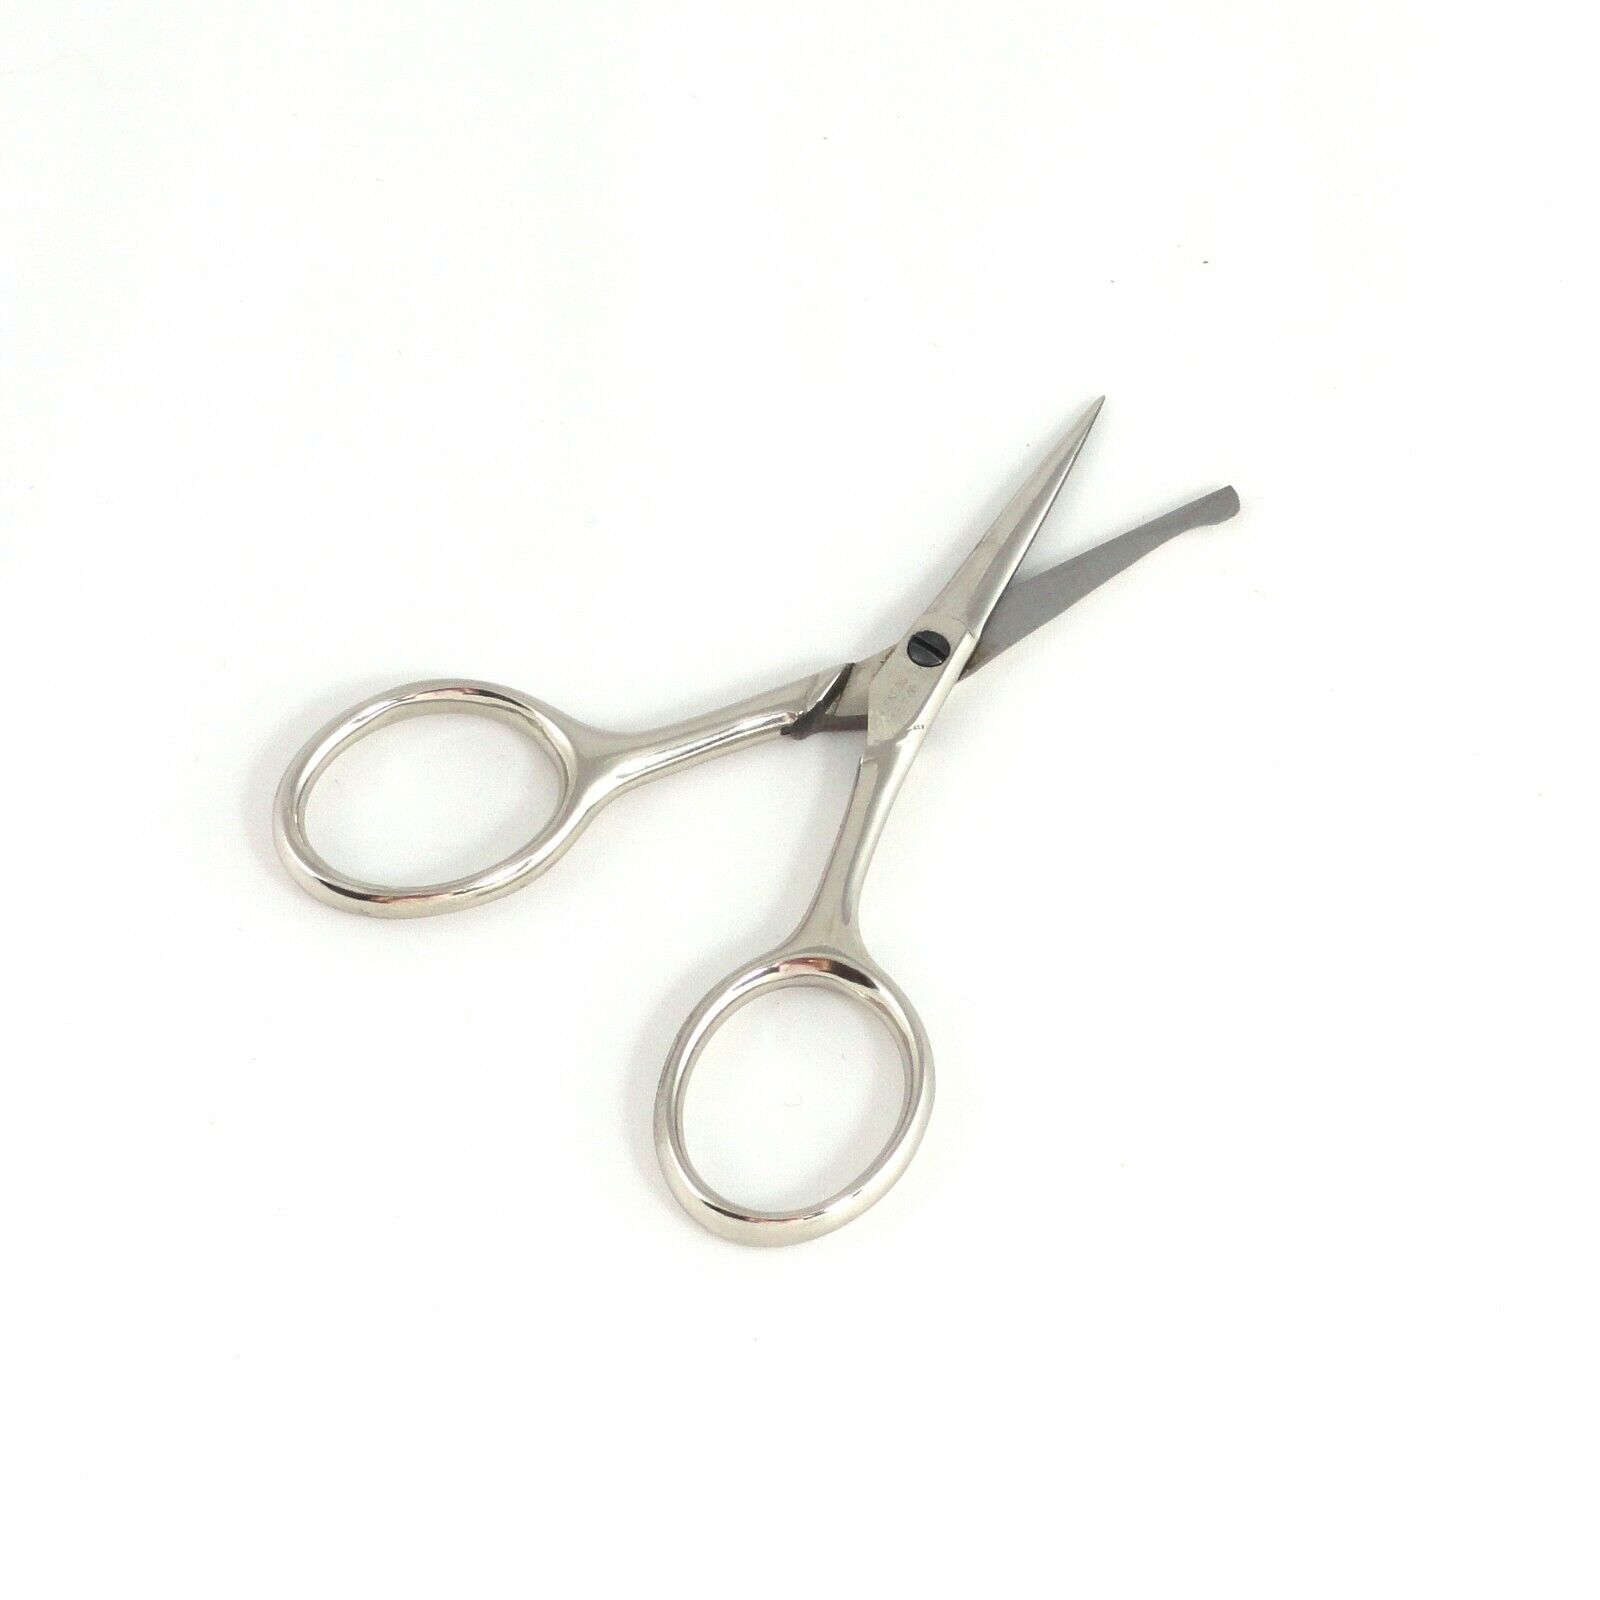 Wasa Ball Tip Lace Scissors